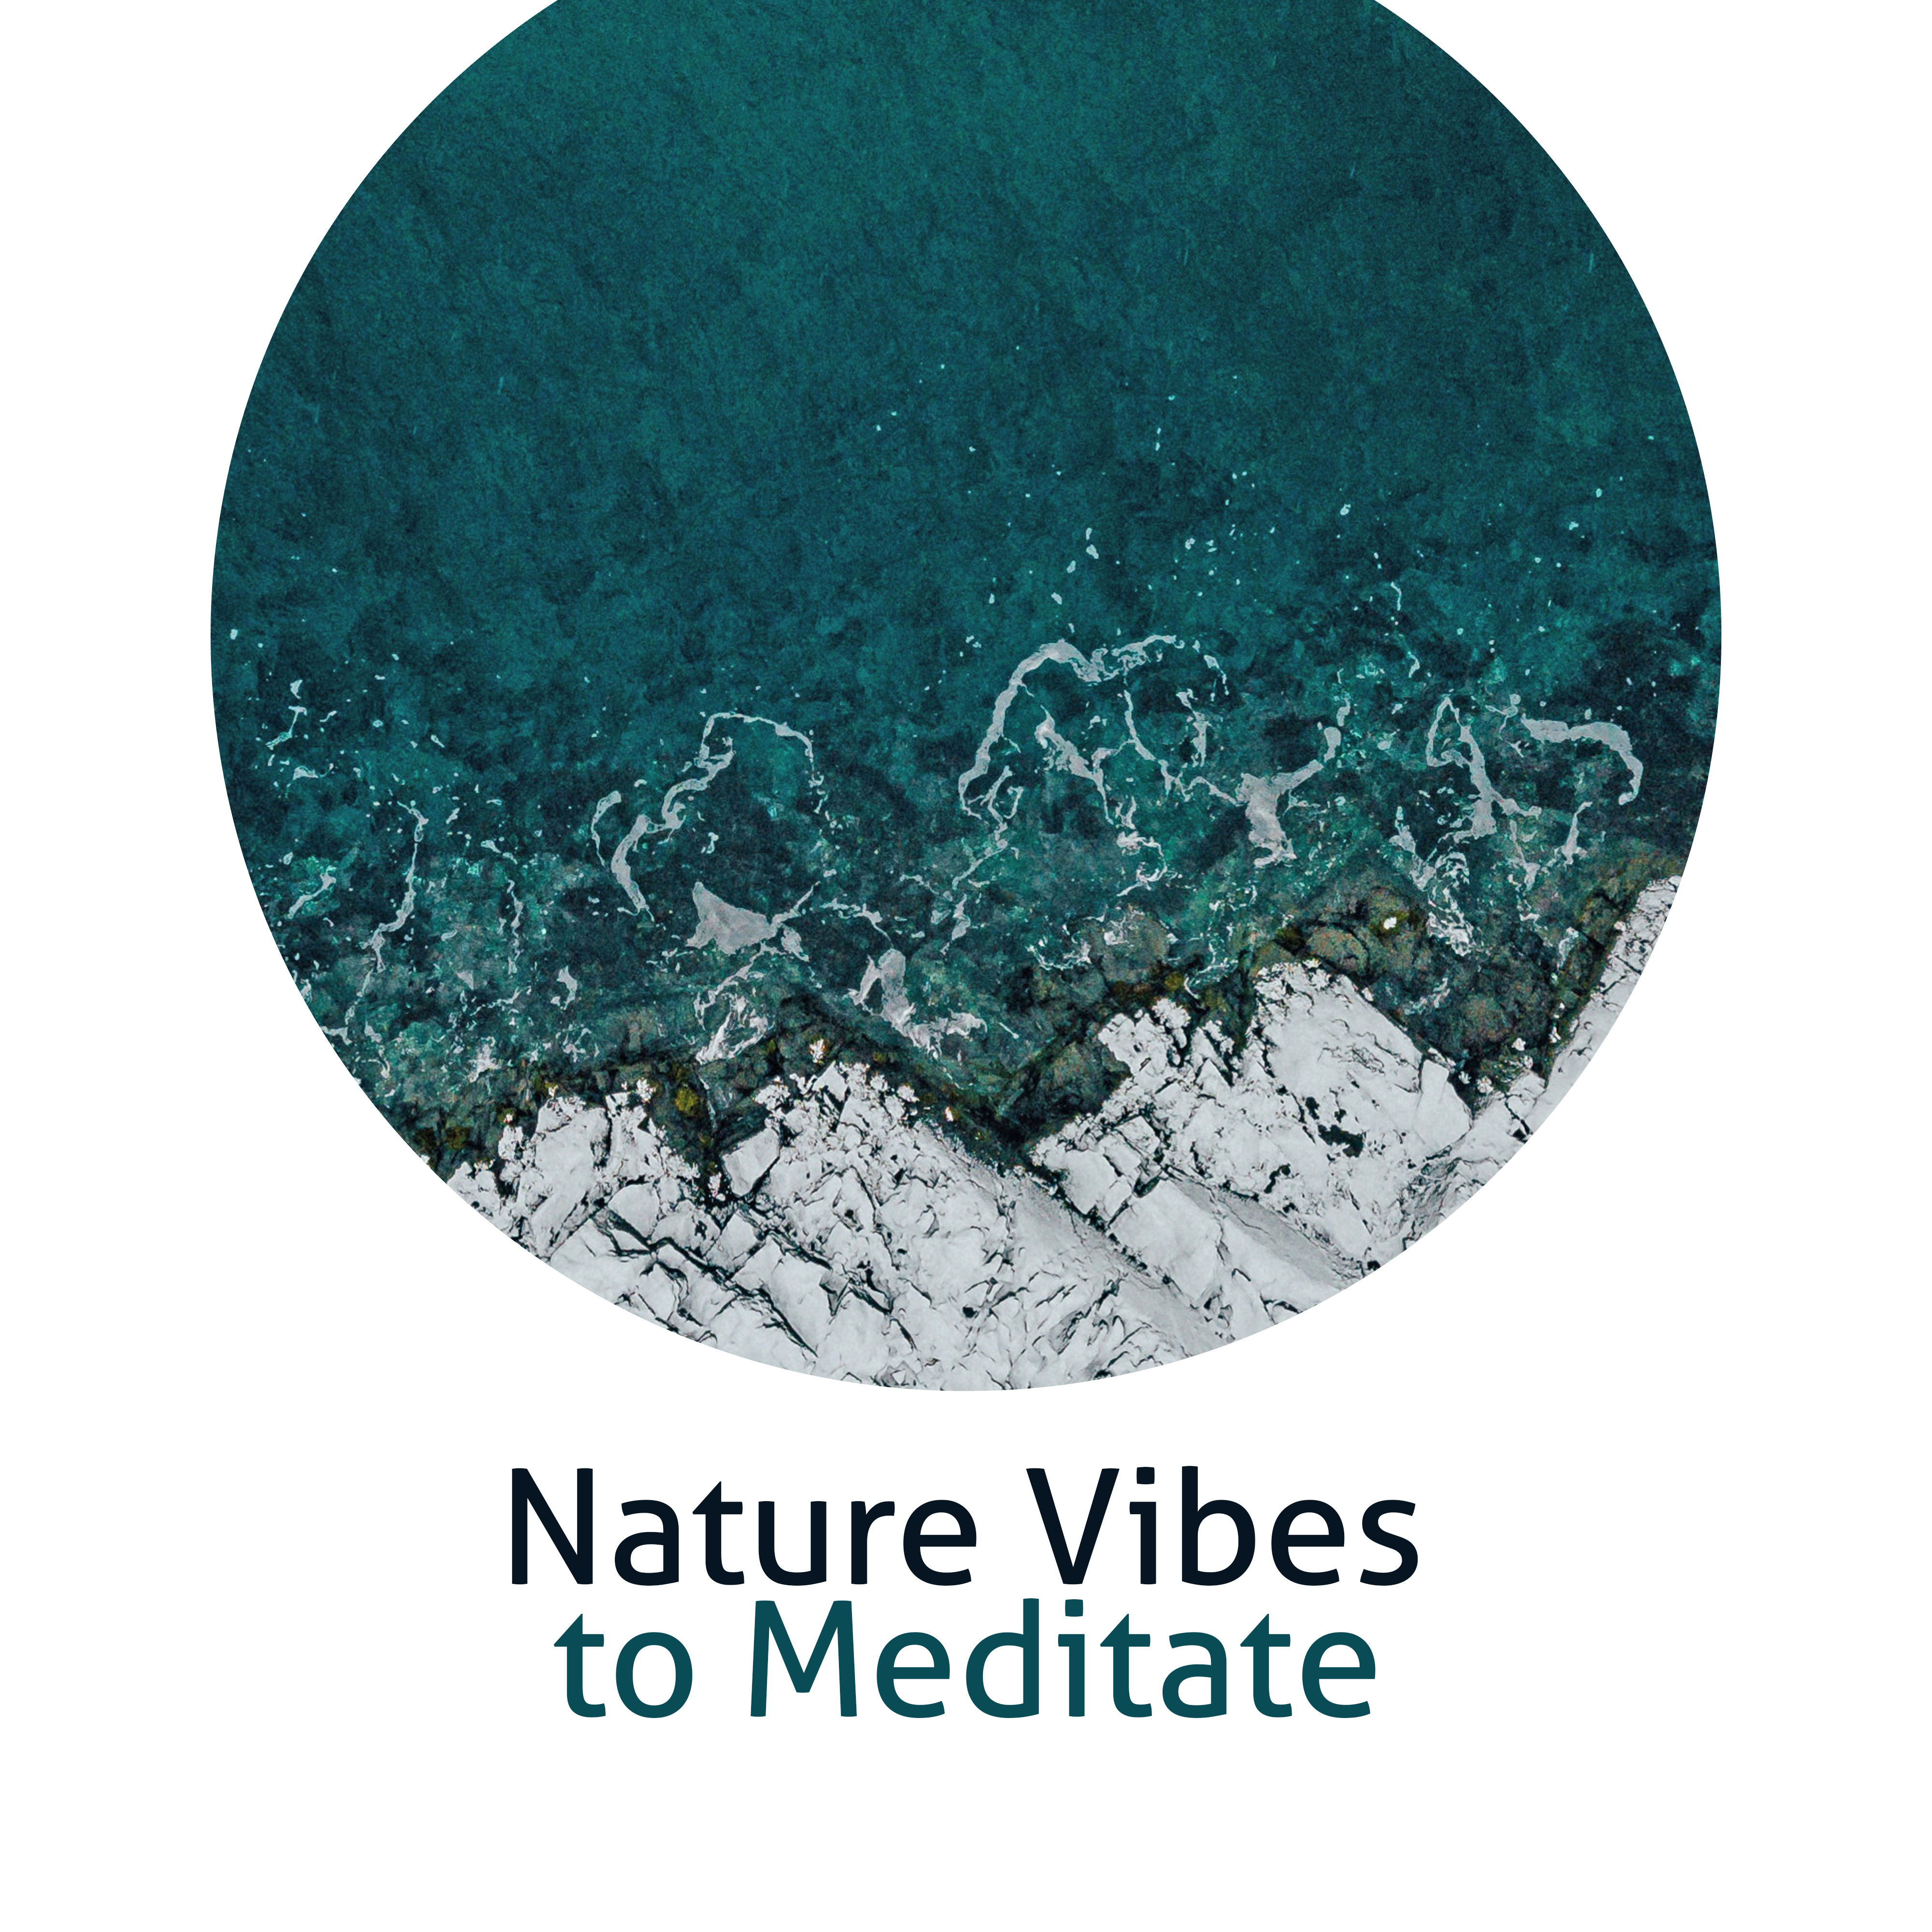 Nature Vibes to Meditate